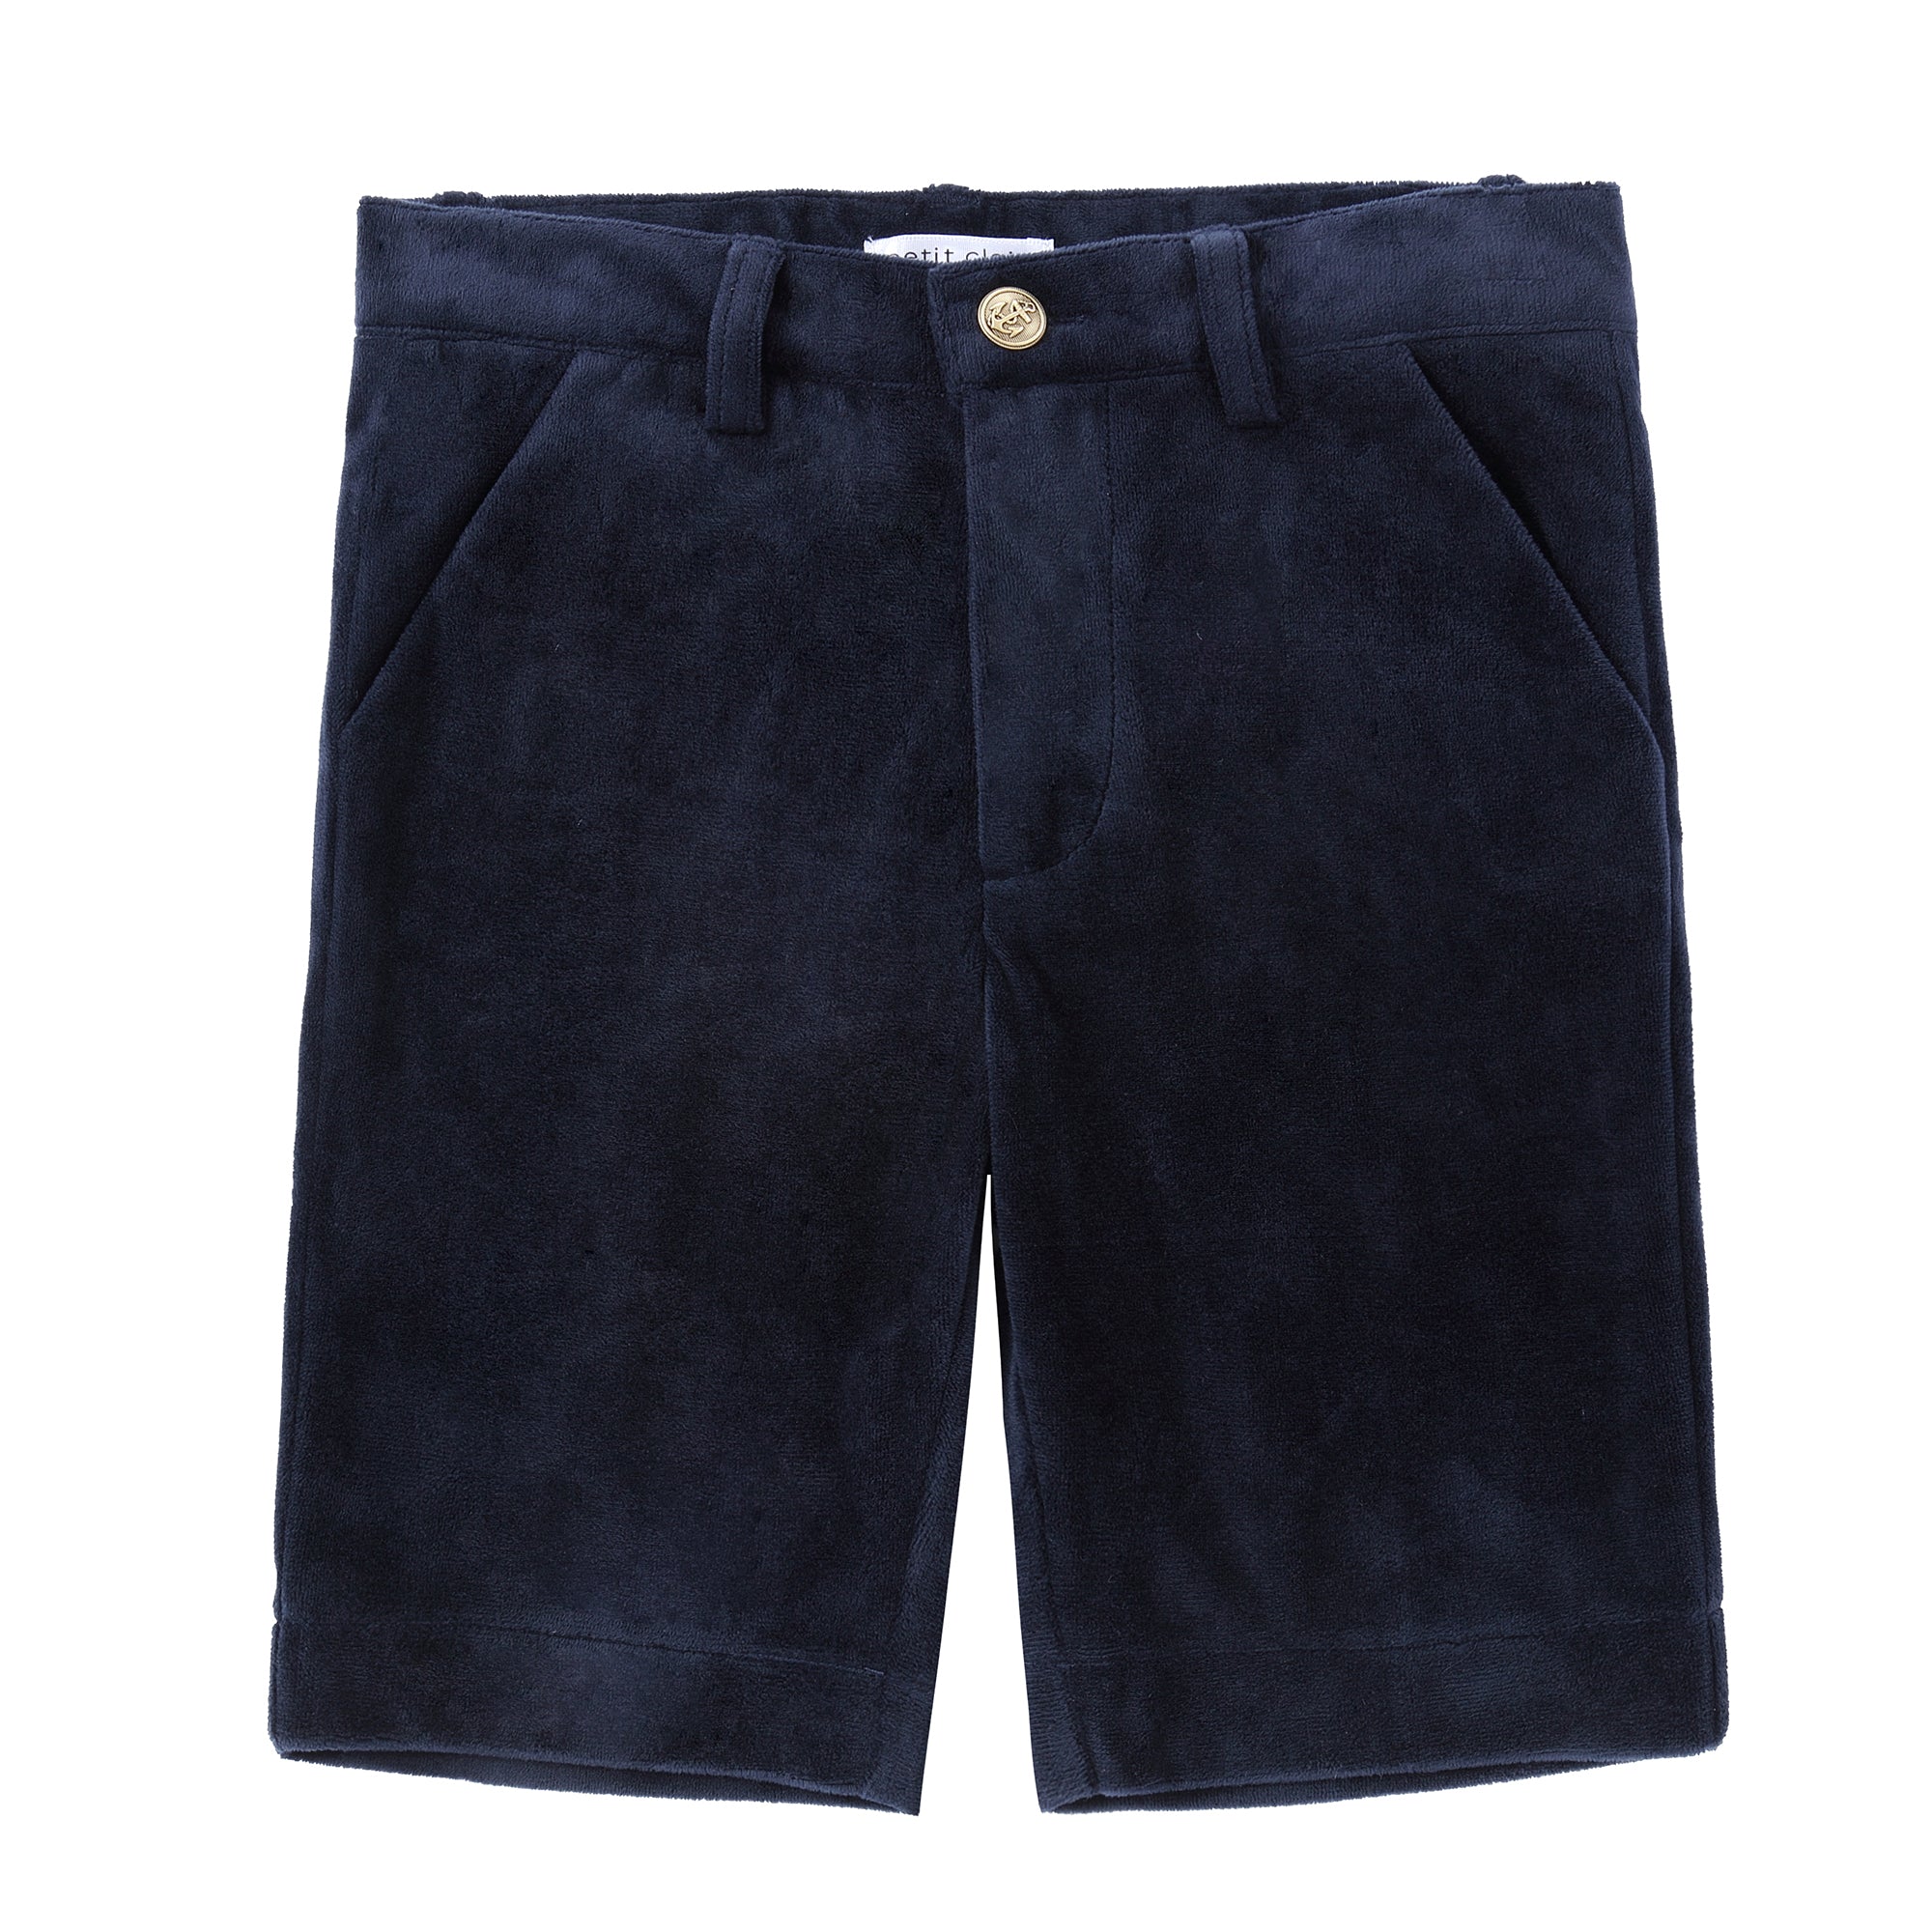 Navy Velvet Shorts With Gold Buttons